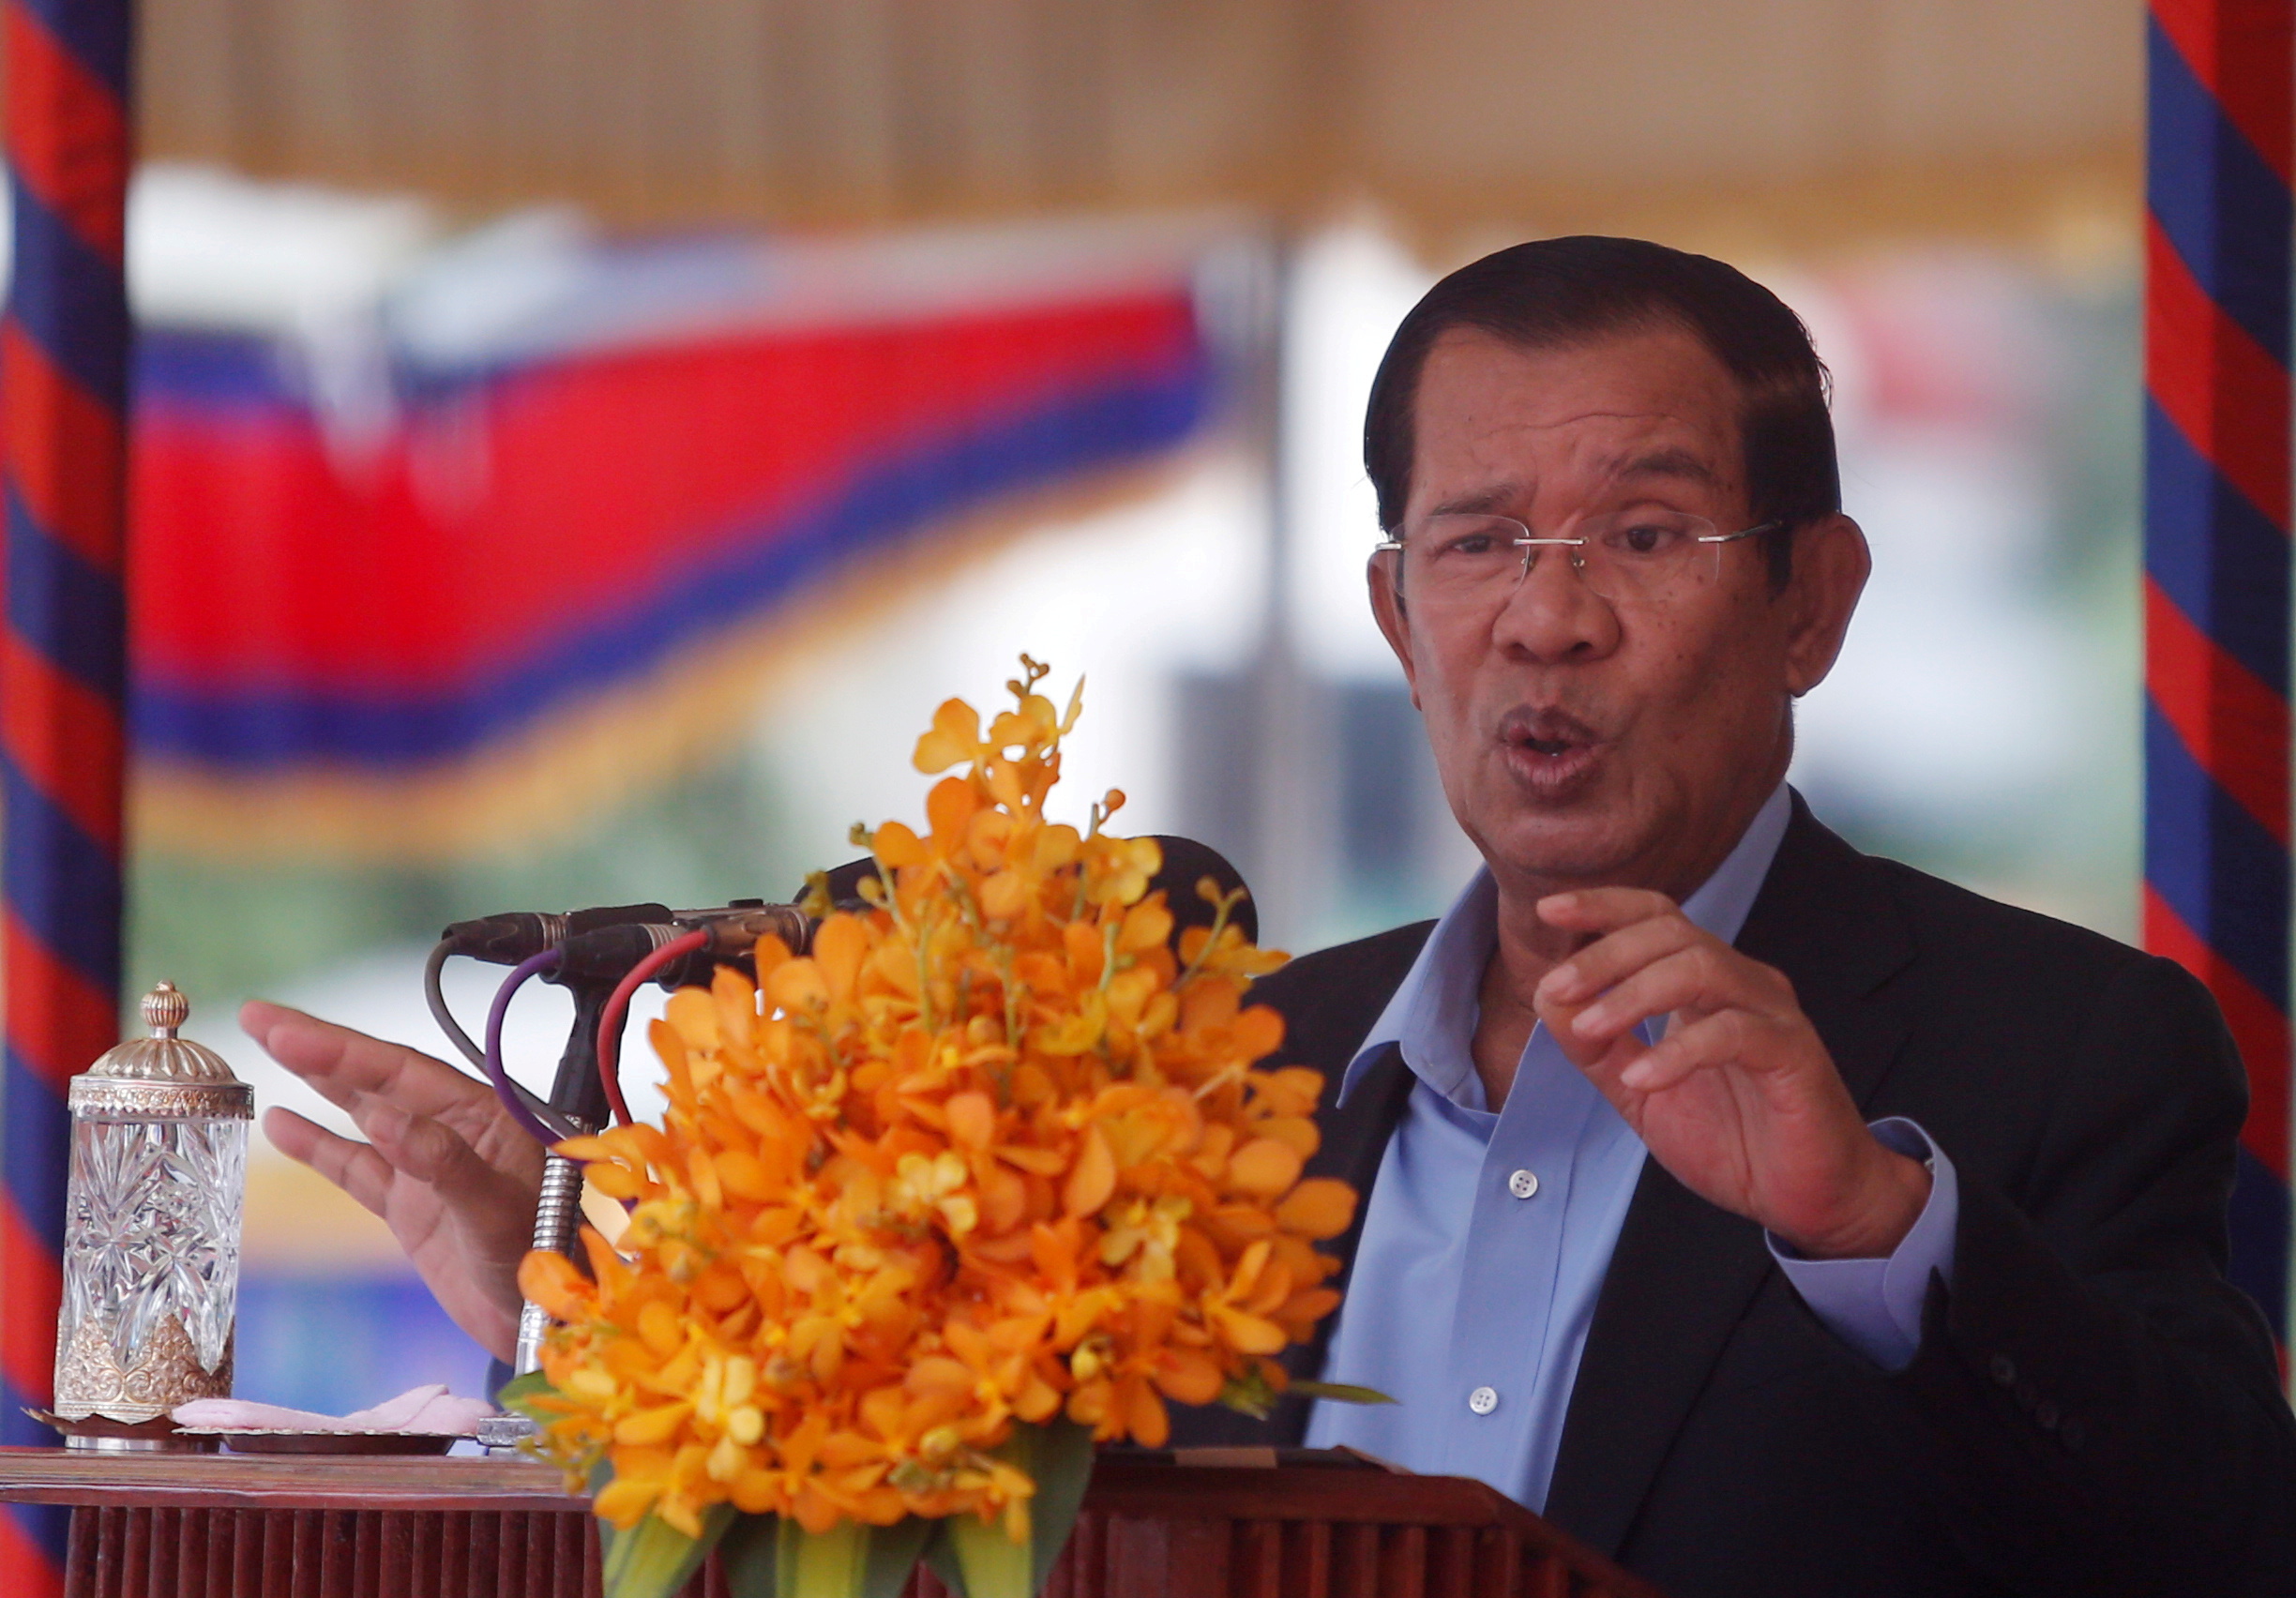 Cambodia's Prime Minister Hun Sen speaks during a groundbreaking ceremony of the Project for Flood Protection, donated by Japan, in Phnom Penh, Cambodia, March 4, 2019. REUTERS/Samrang Pring